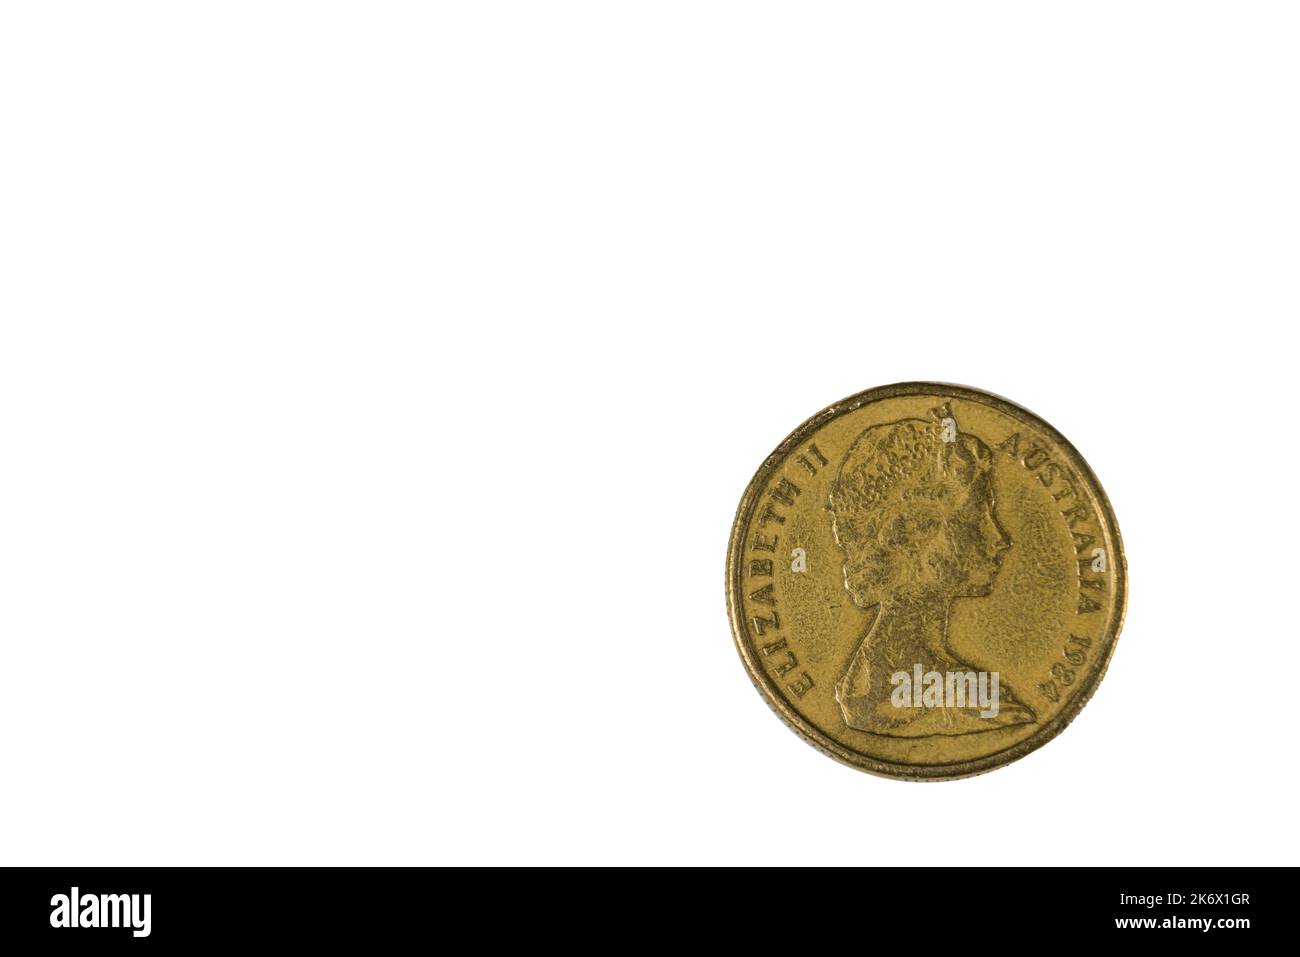 Close-up view of reverse side of 1984 Australian two dollar coin depicting Elizabeth II. Numismatic concept. Stock Photo